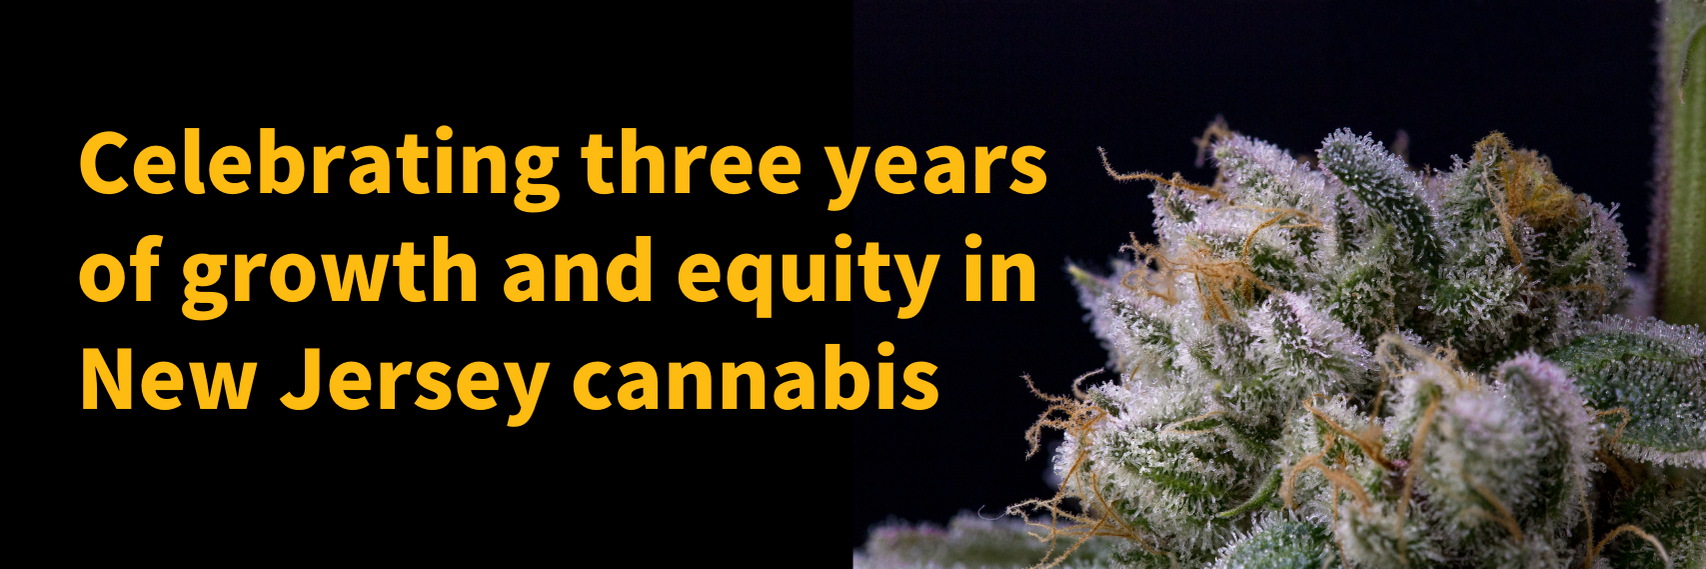 Celebrating three years of growth and equity in NJ cannabis